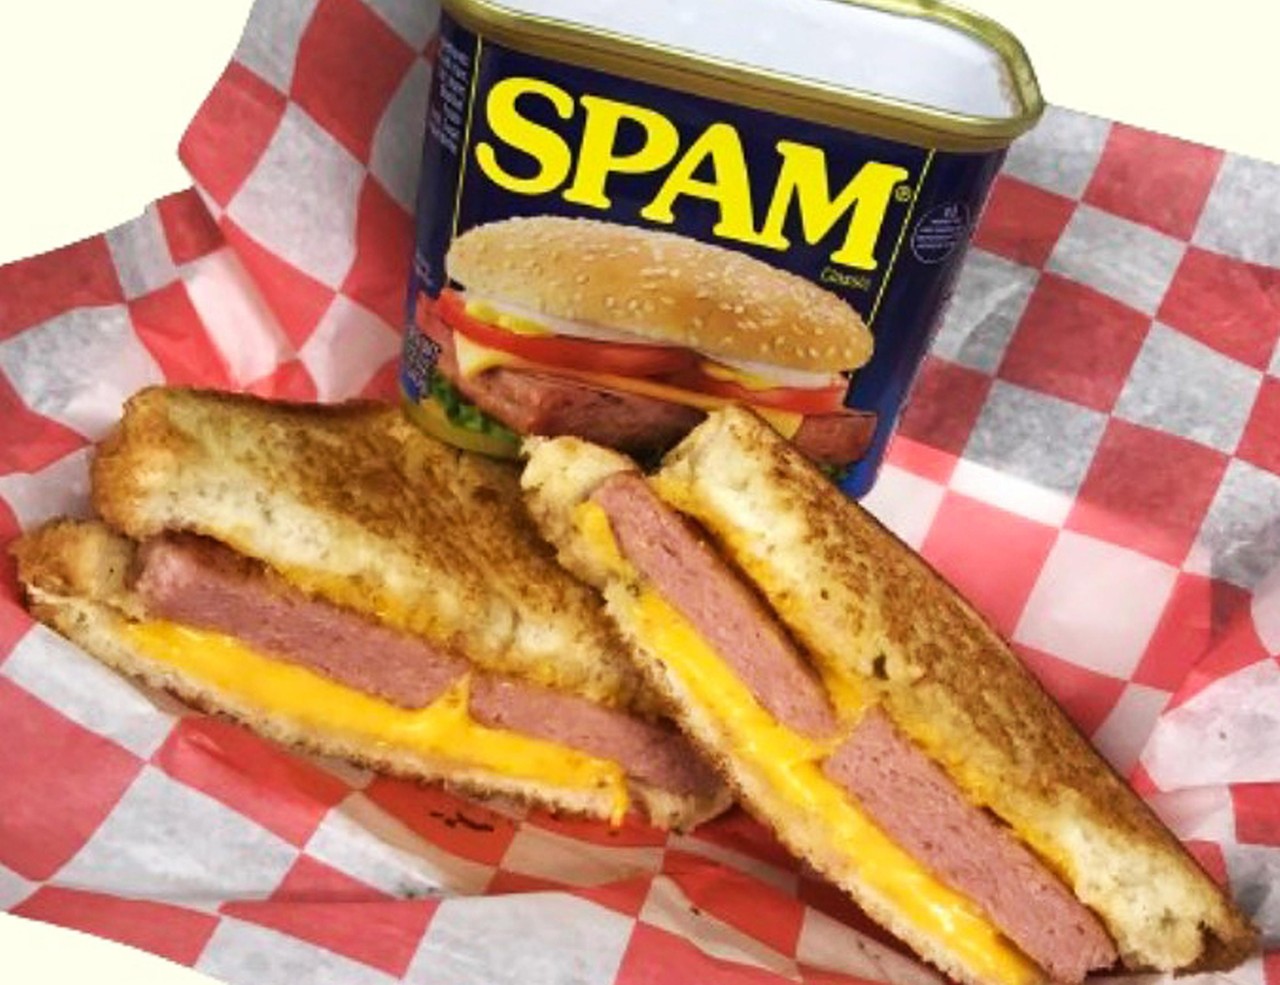 FRIED SPAM GRILLED CHEESE
A delicious twist on the classic, featuring crispy pan-fried spam layered with gooey melted cheese between toasted bread. The result is a delightful blend of savory and cheesy goodness.
Showstopper Concessions